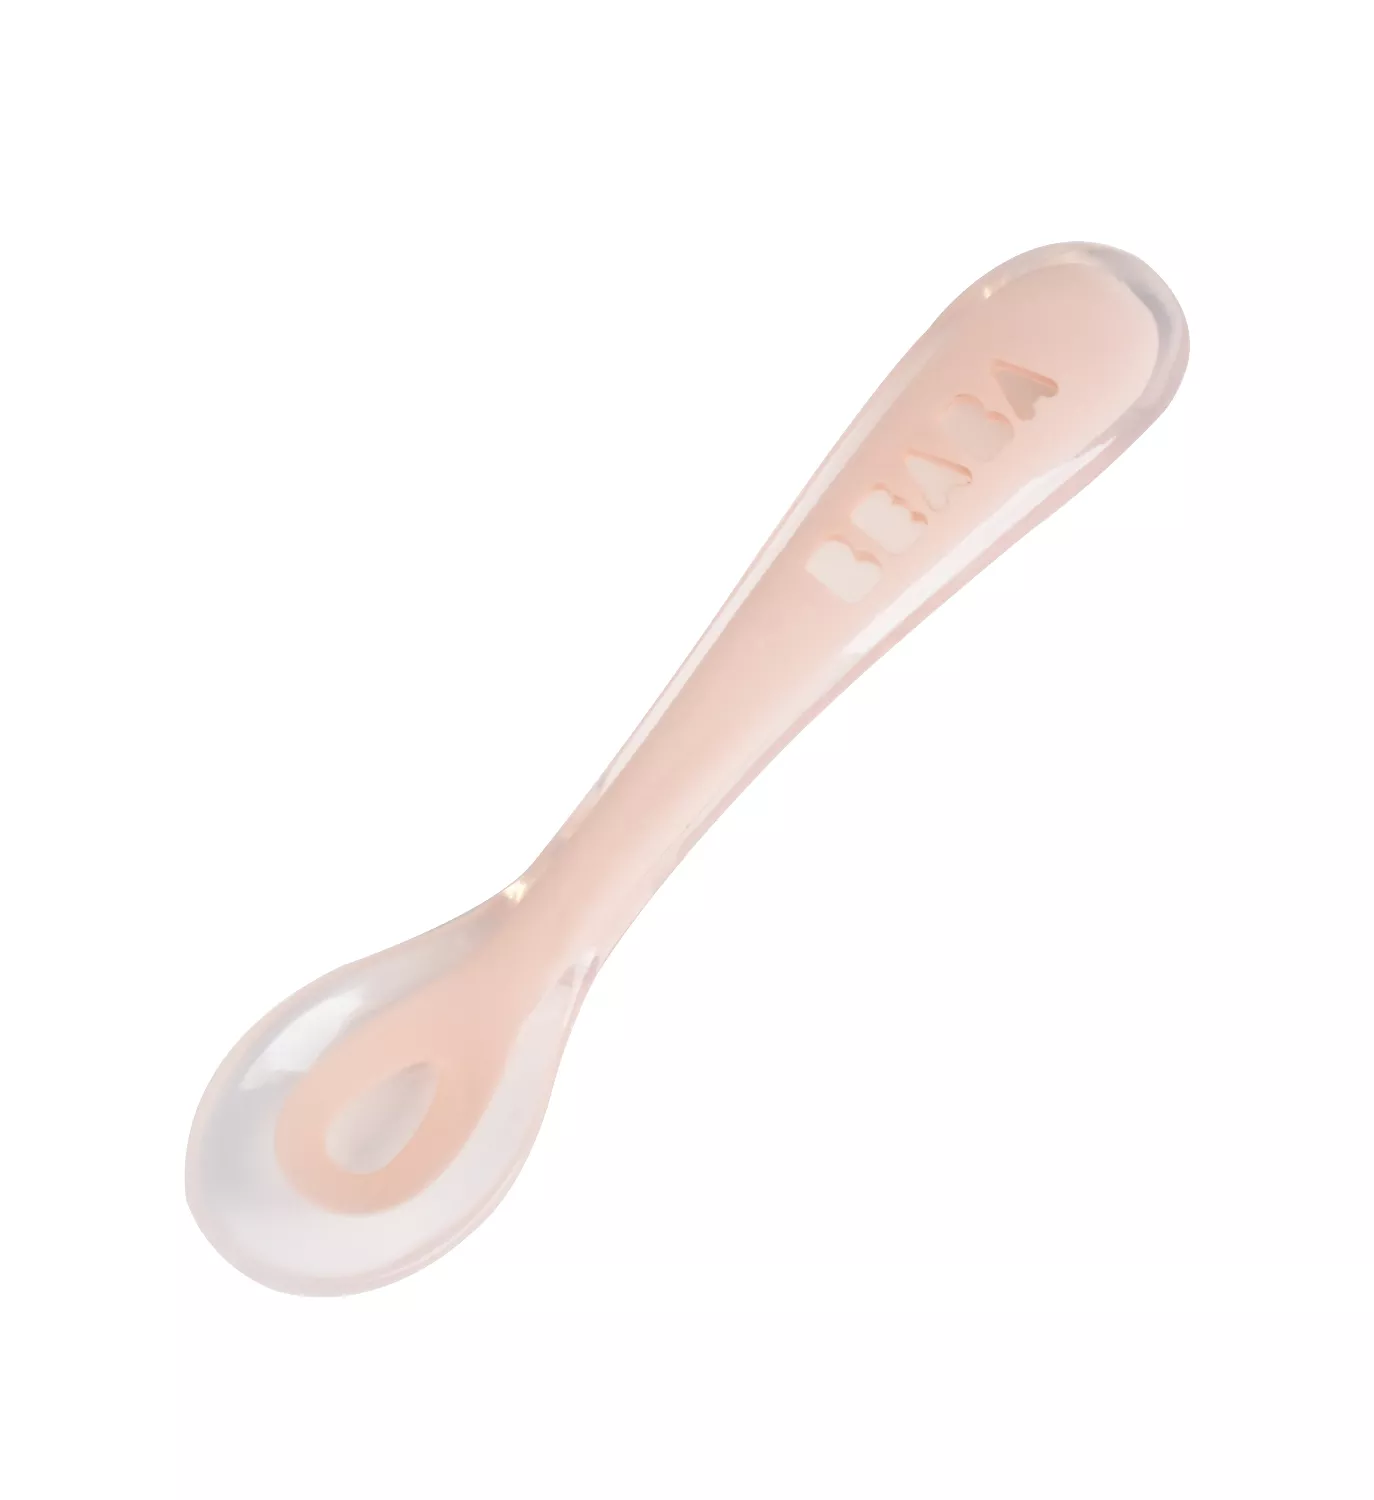 Beaba Silicone Spoon 2nd Age